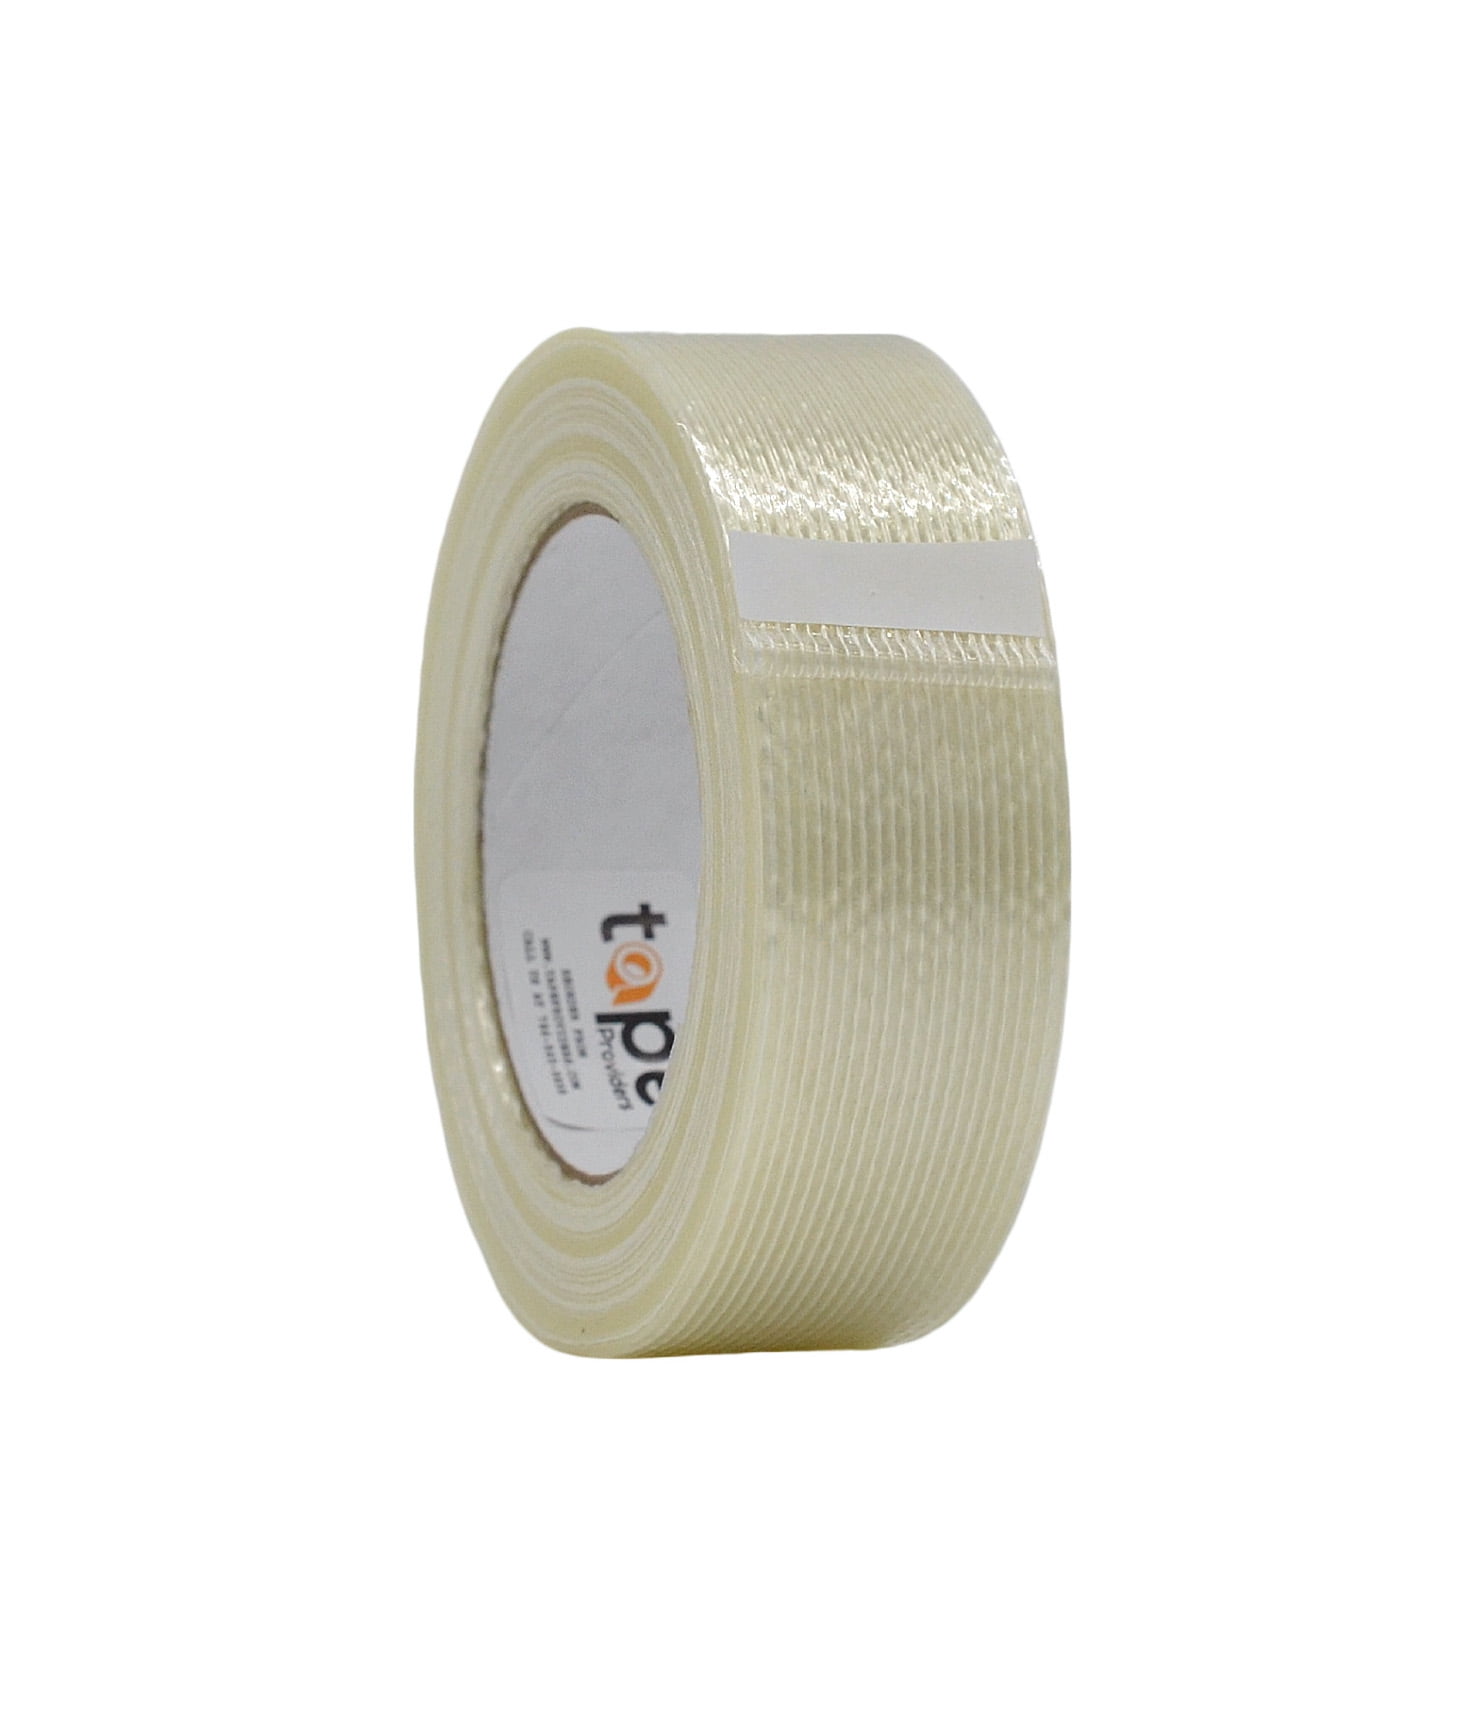 T.R.U 4 Mil FIL-795 Filament Strapping Tape: 3 in Pack of 1 Wide x 60 yds. 